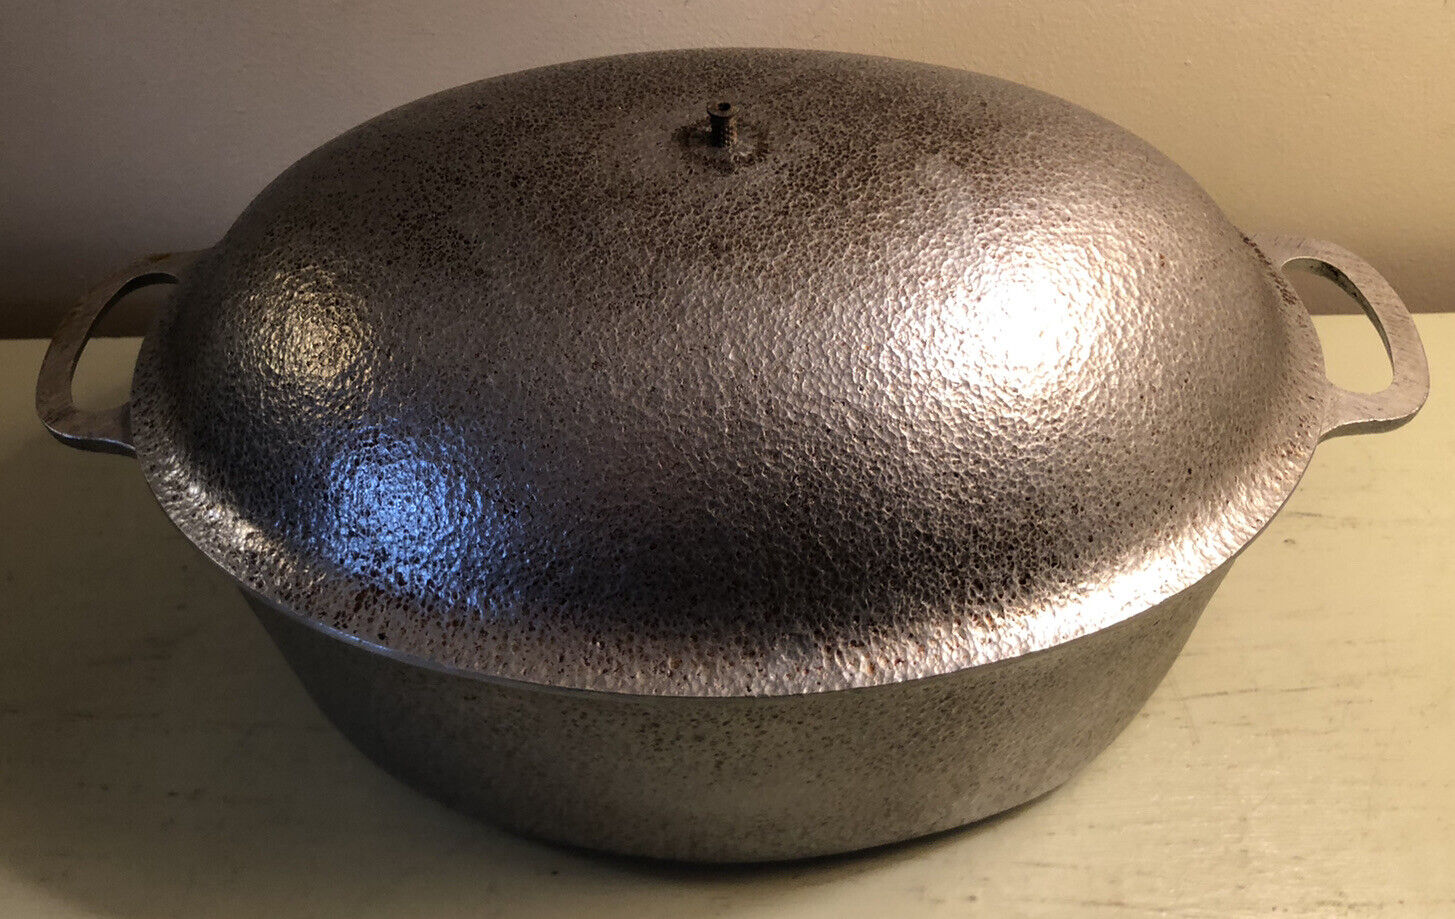 Vintage Hammered Club Aluminum Hammercraft 13” Oval Dutch Oven Roaster with Lid